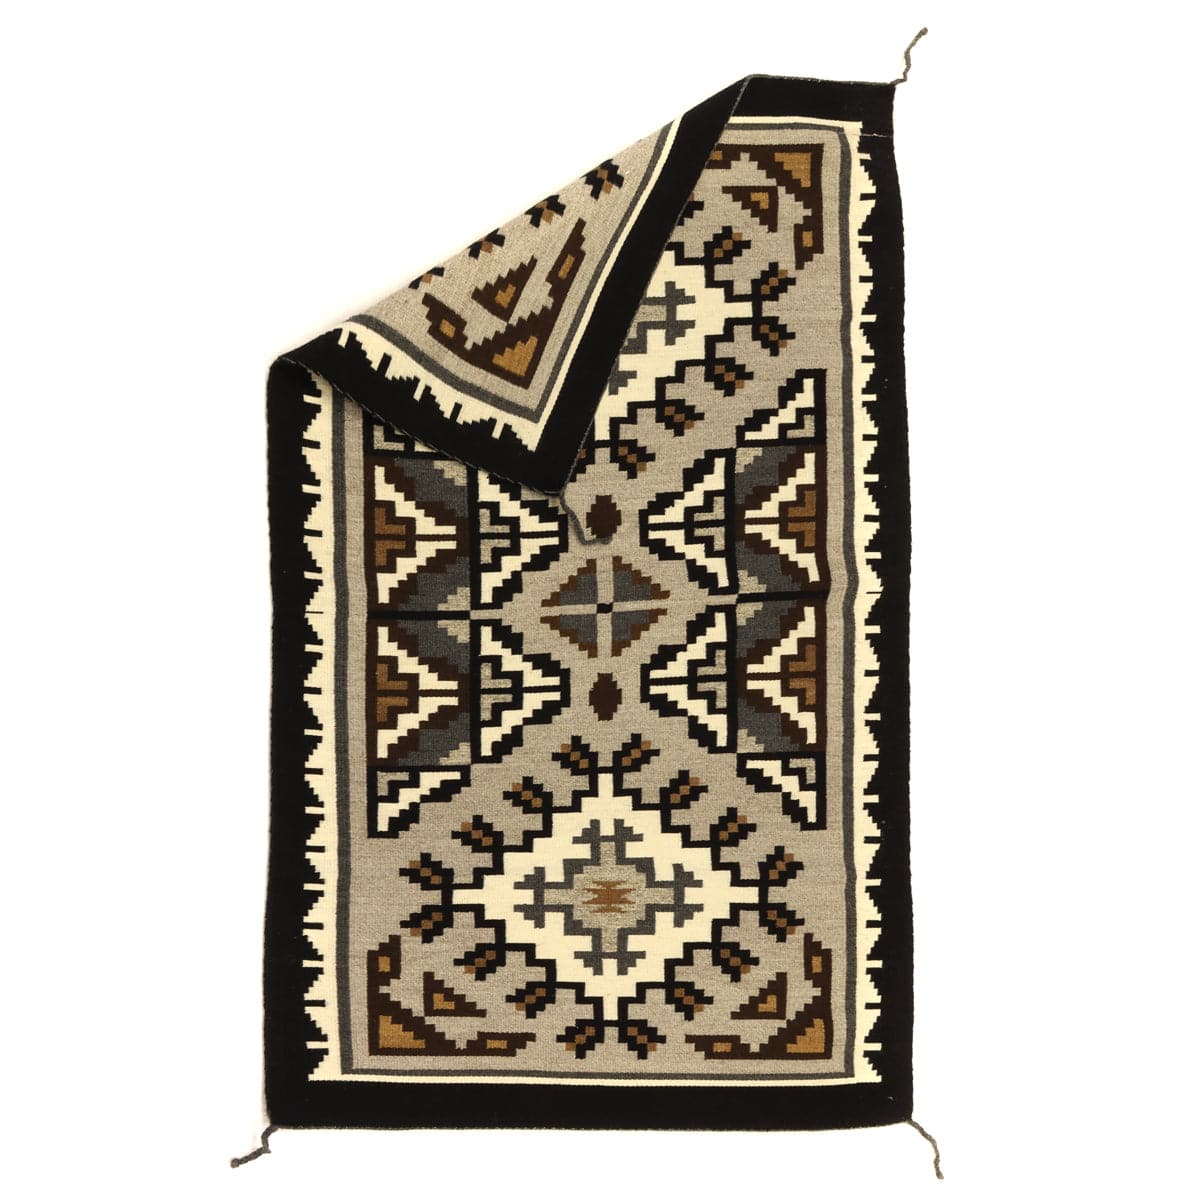 Lorraine Taylor - Navajo Two Grey Hills Rug, Contemporary, 47" x 28" DONATION WILL BE MADE TO BLESSINGWAY (T92308-0314-015) 4